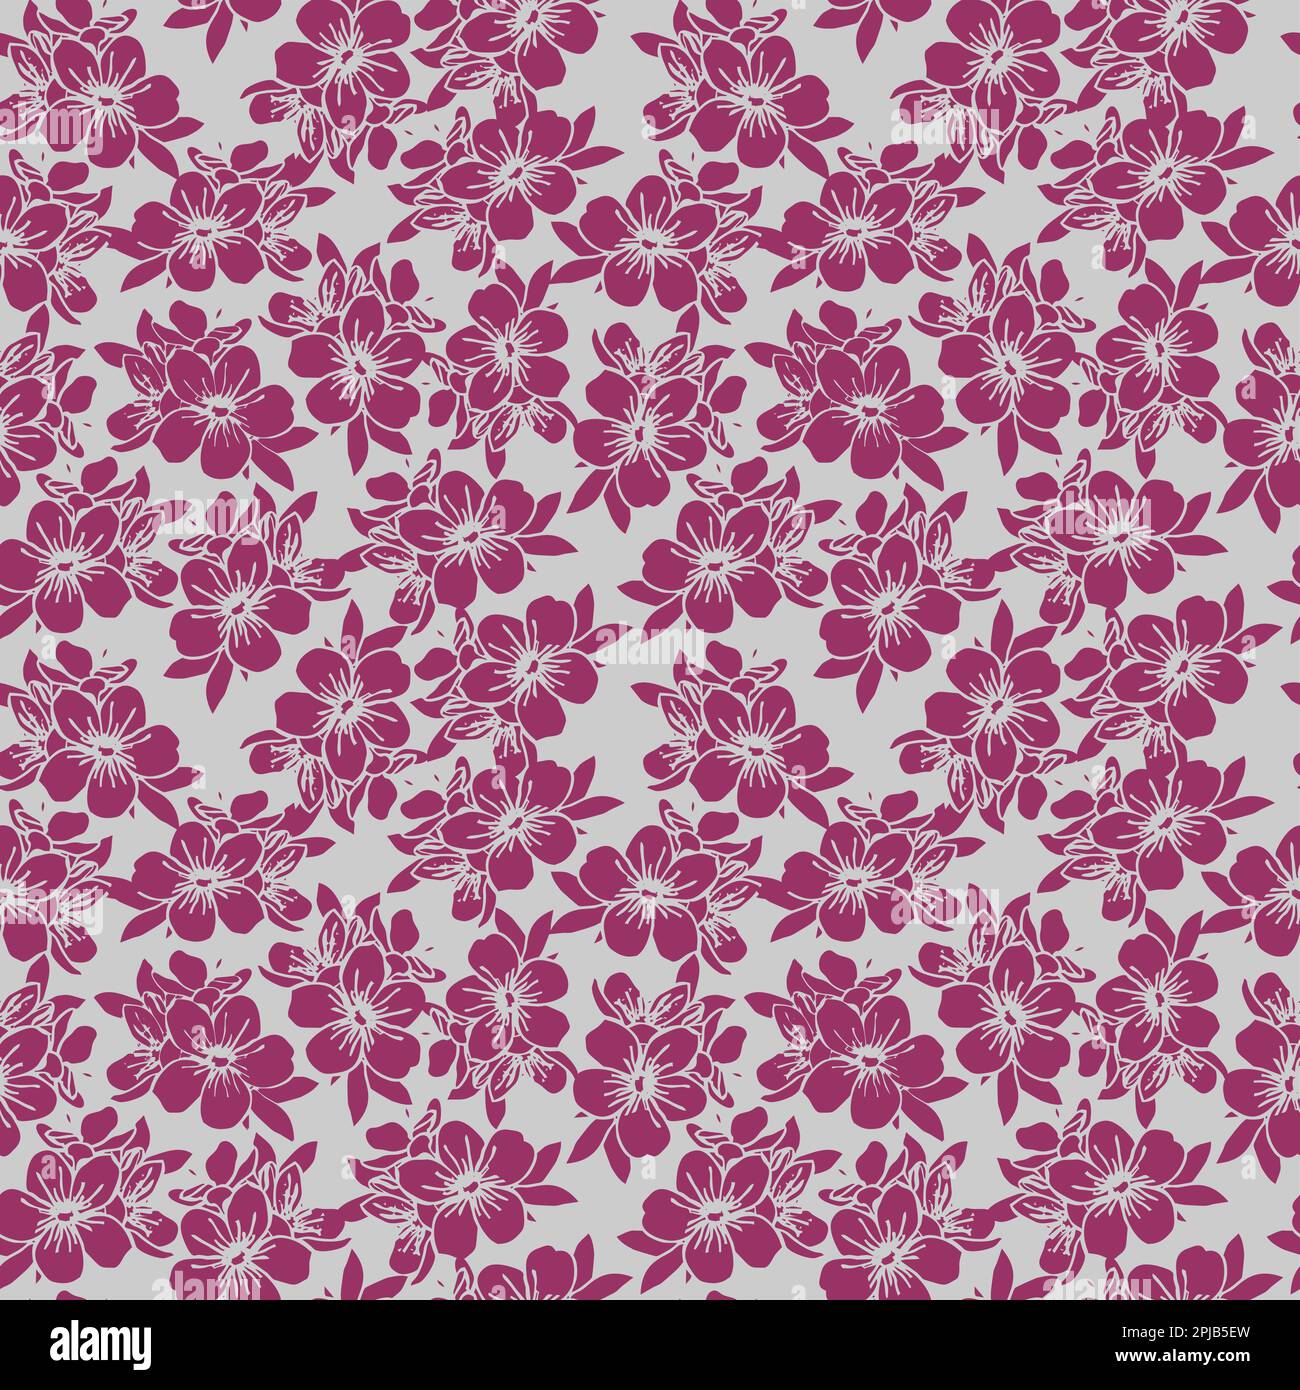 seamless pattern of pink silhouettes of flowers on a gray background, texture, design Stock Photo